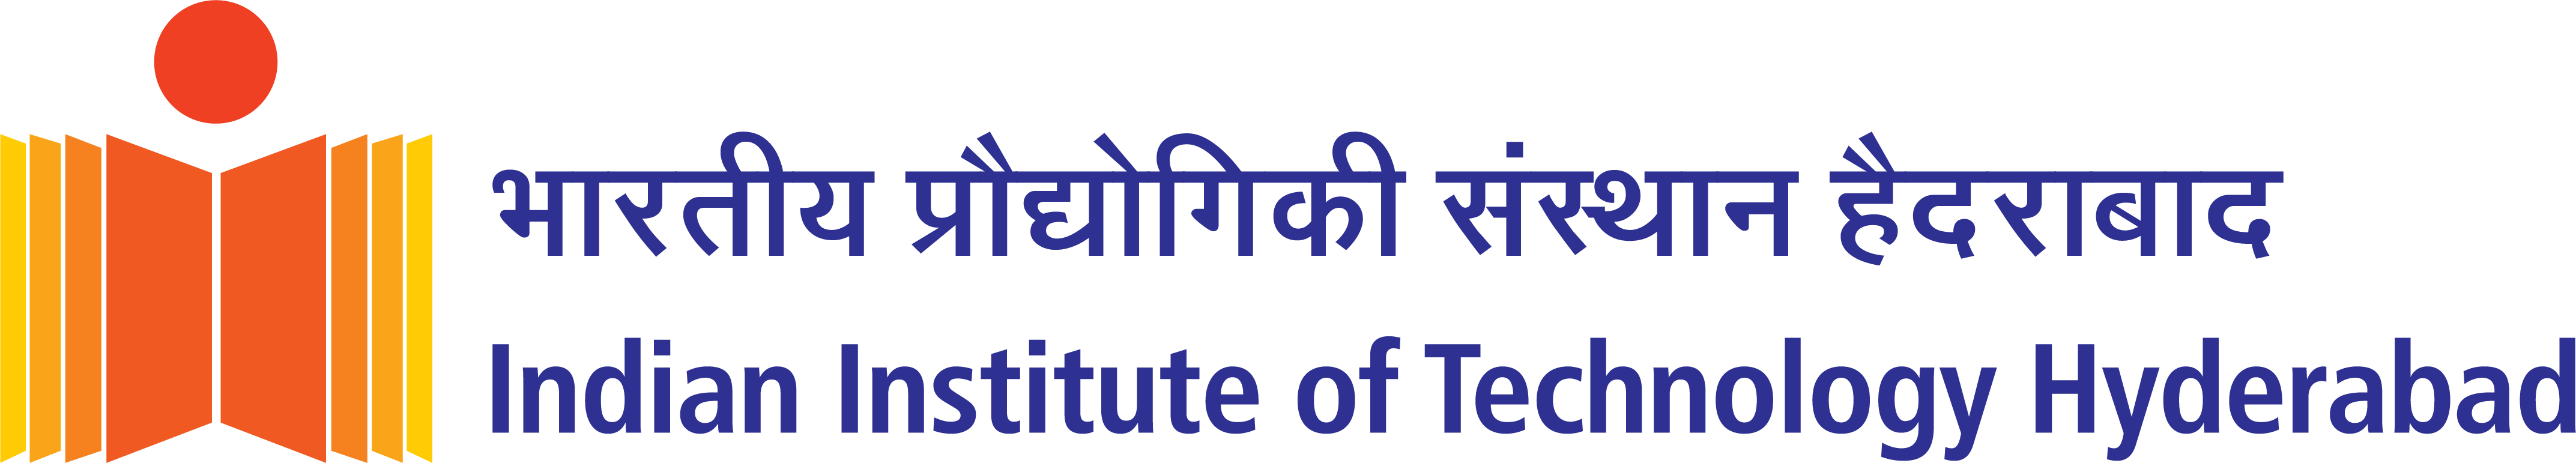 Indian Institute of Technology Hydrabad-logo